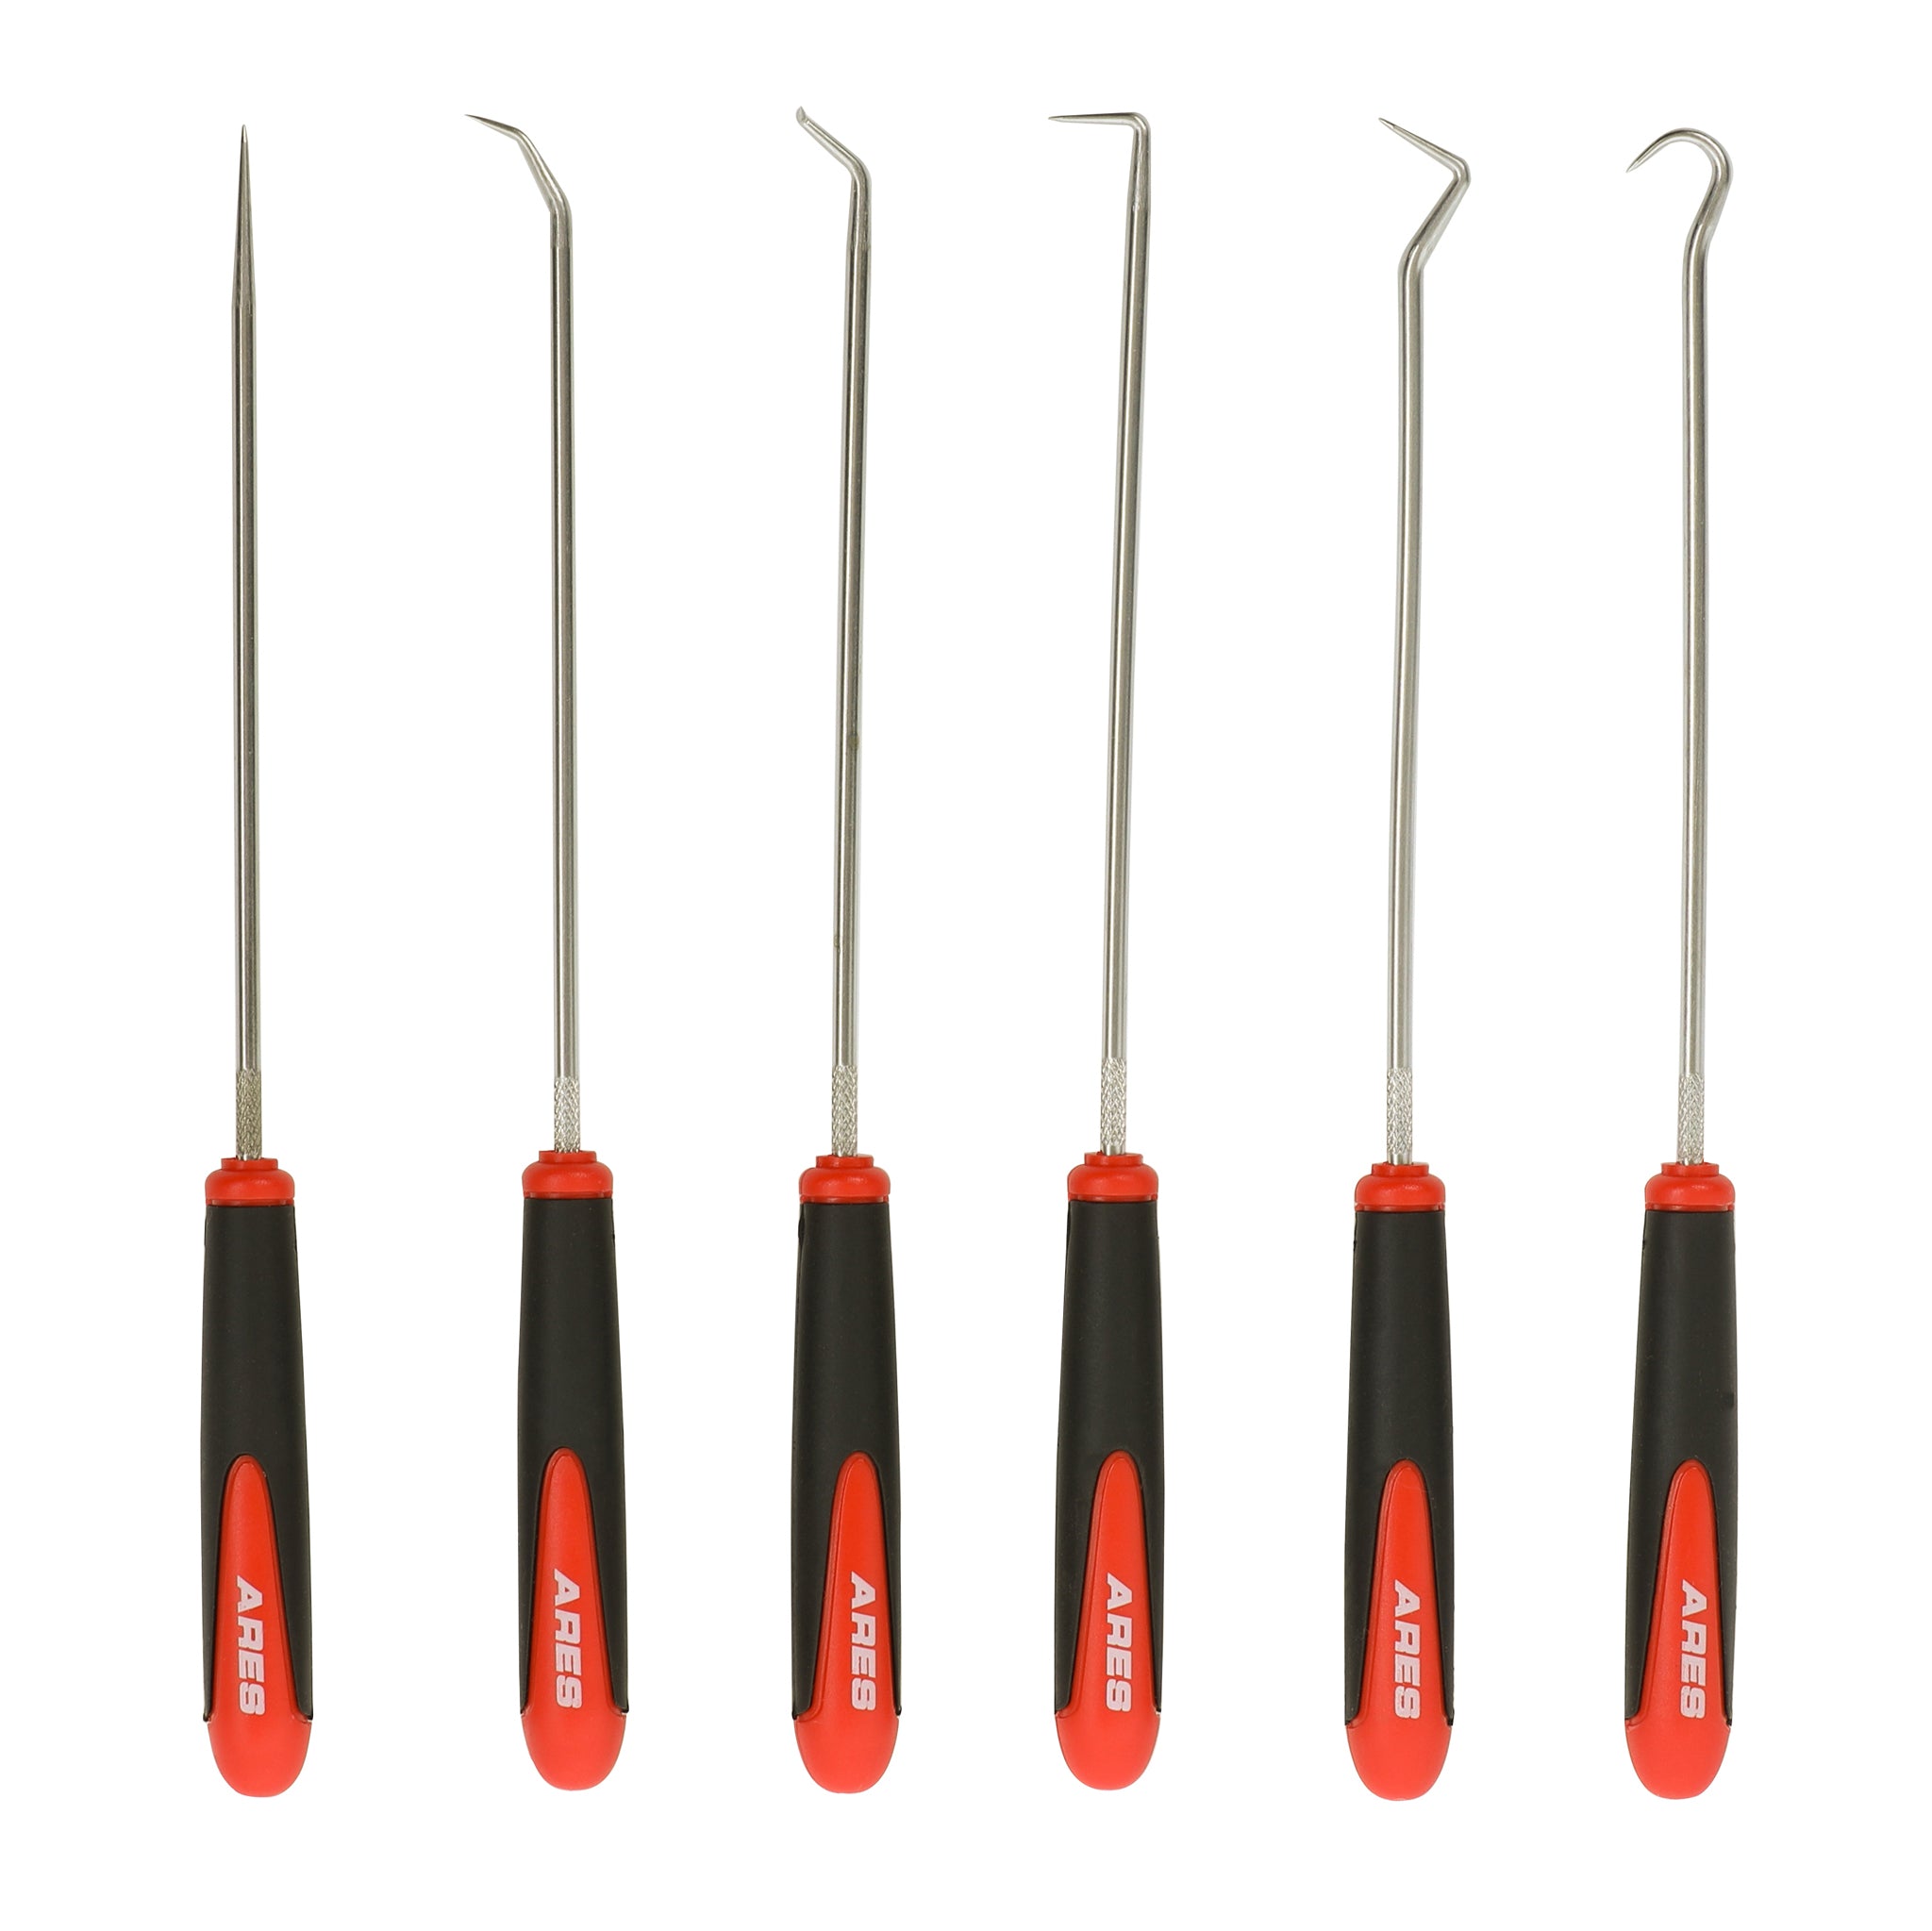 Extra Long Precision Hook and Pick Set – ARES Tool, MJD Industries, LLC